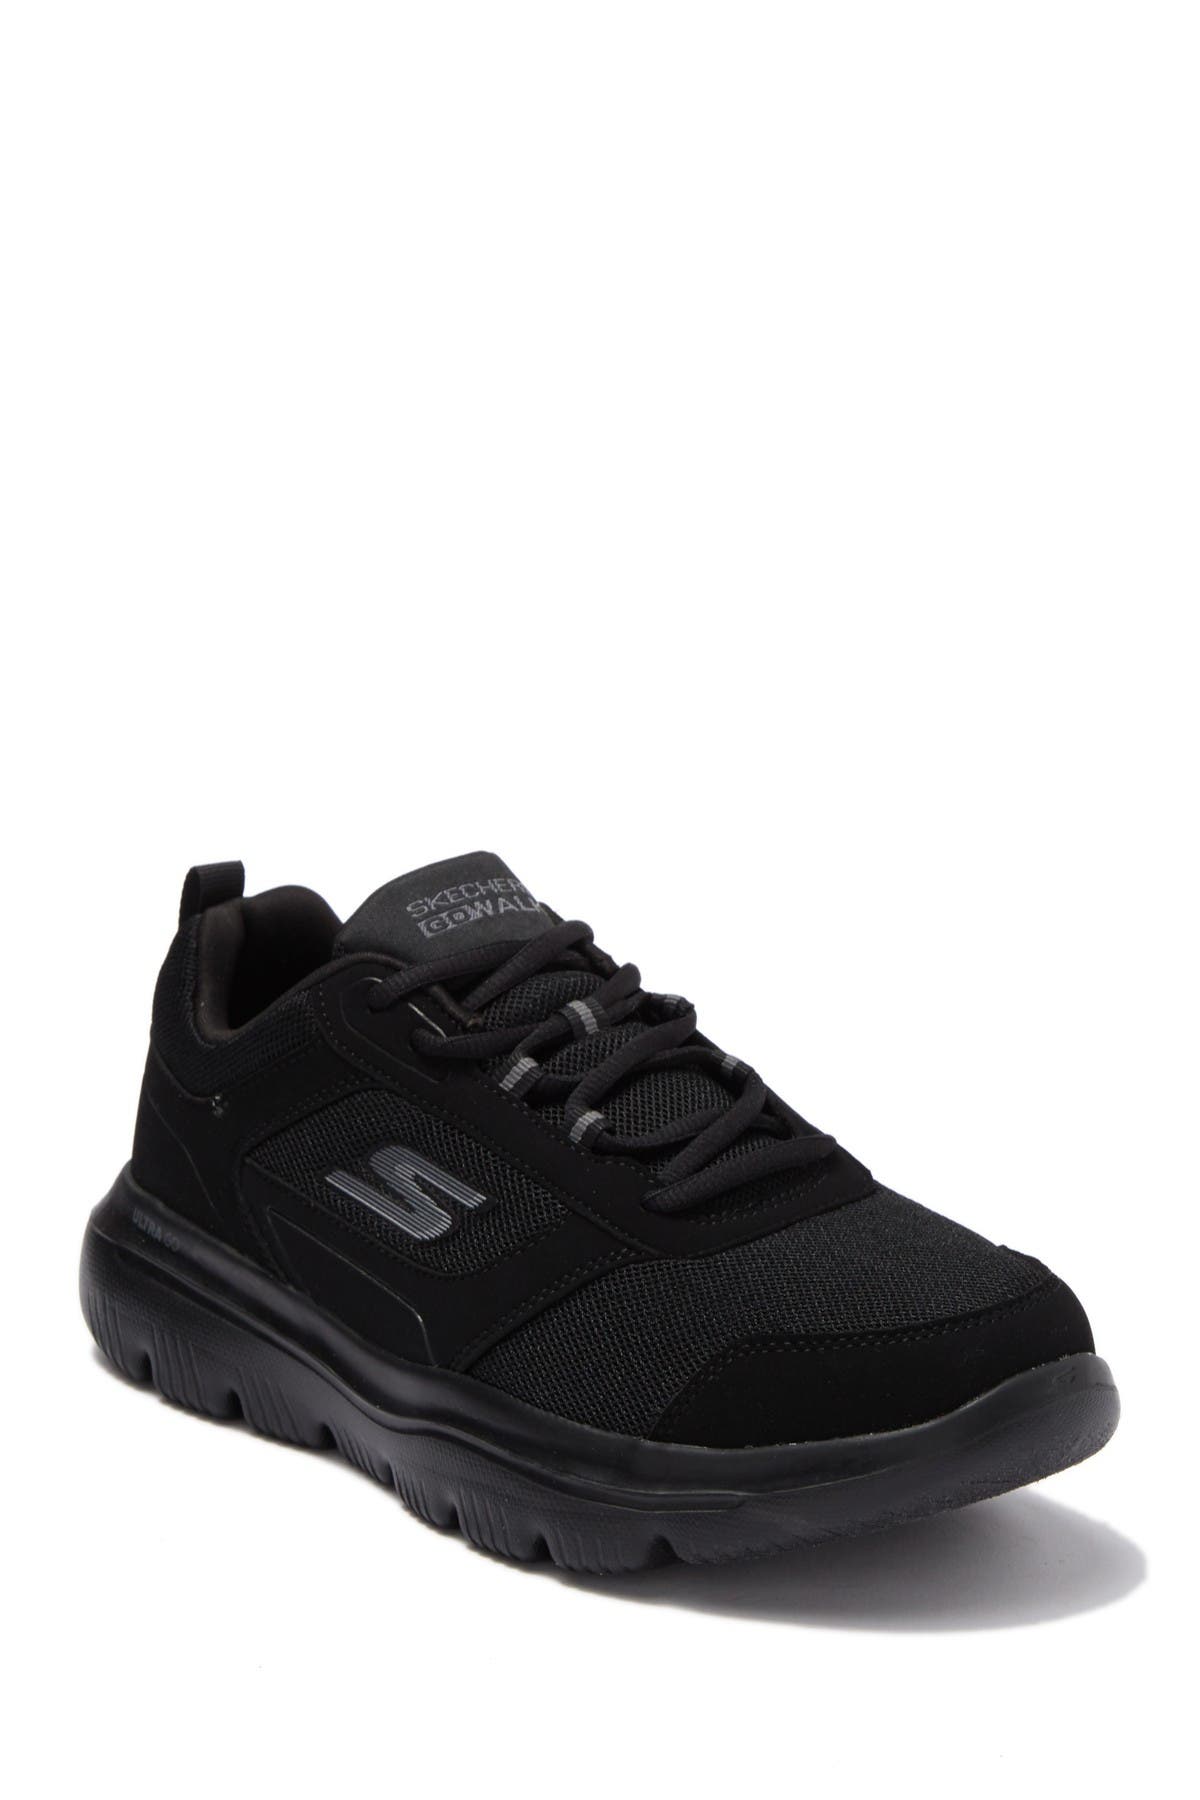 skechers go walk leather shoes